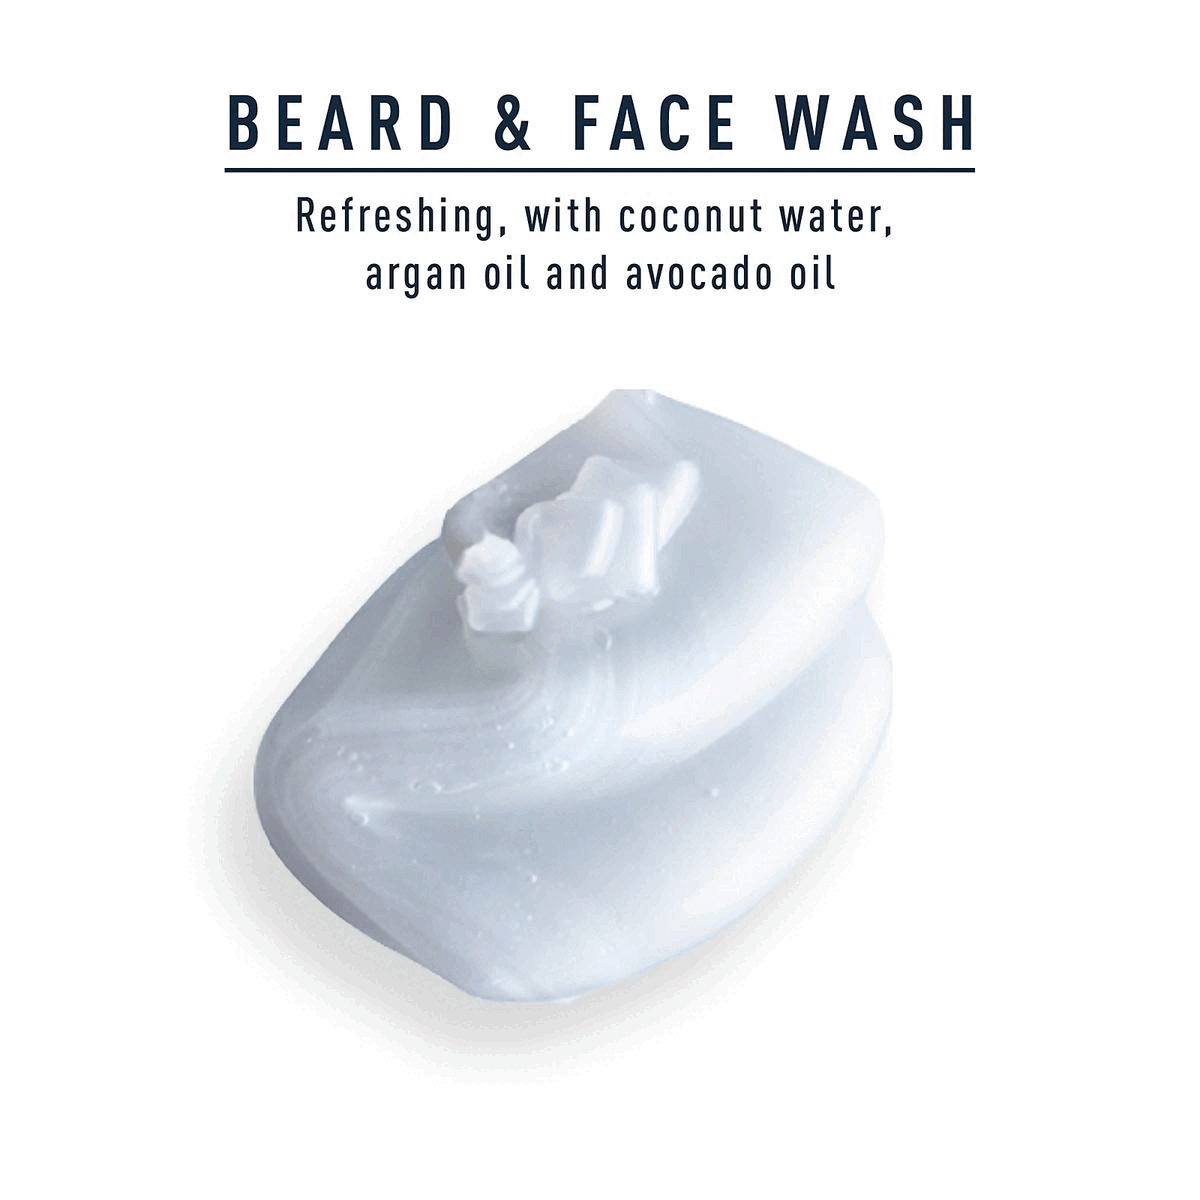 beard and face wash. Refreshing, with coconut water, argan oil and avocado oil. Beard Oil, softening with plant-based argan, joijoba, avocado, aacadamia seed and alomond oils. 130ml. Soft Beard Balm, conditioning with cocoa butter, argan oil and shea butter.